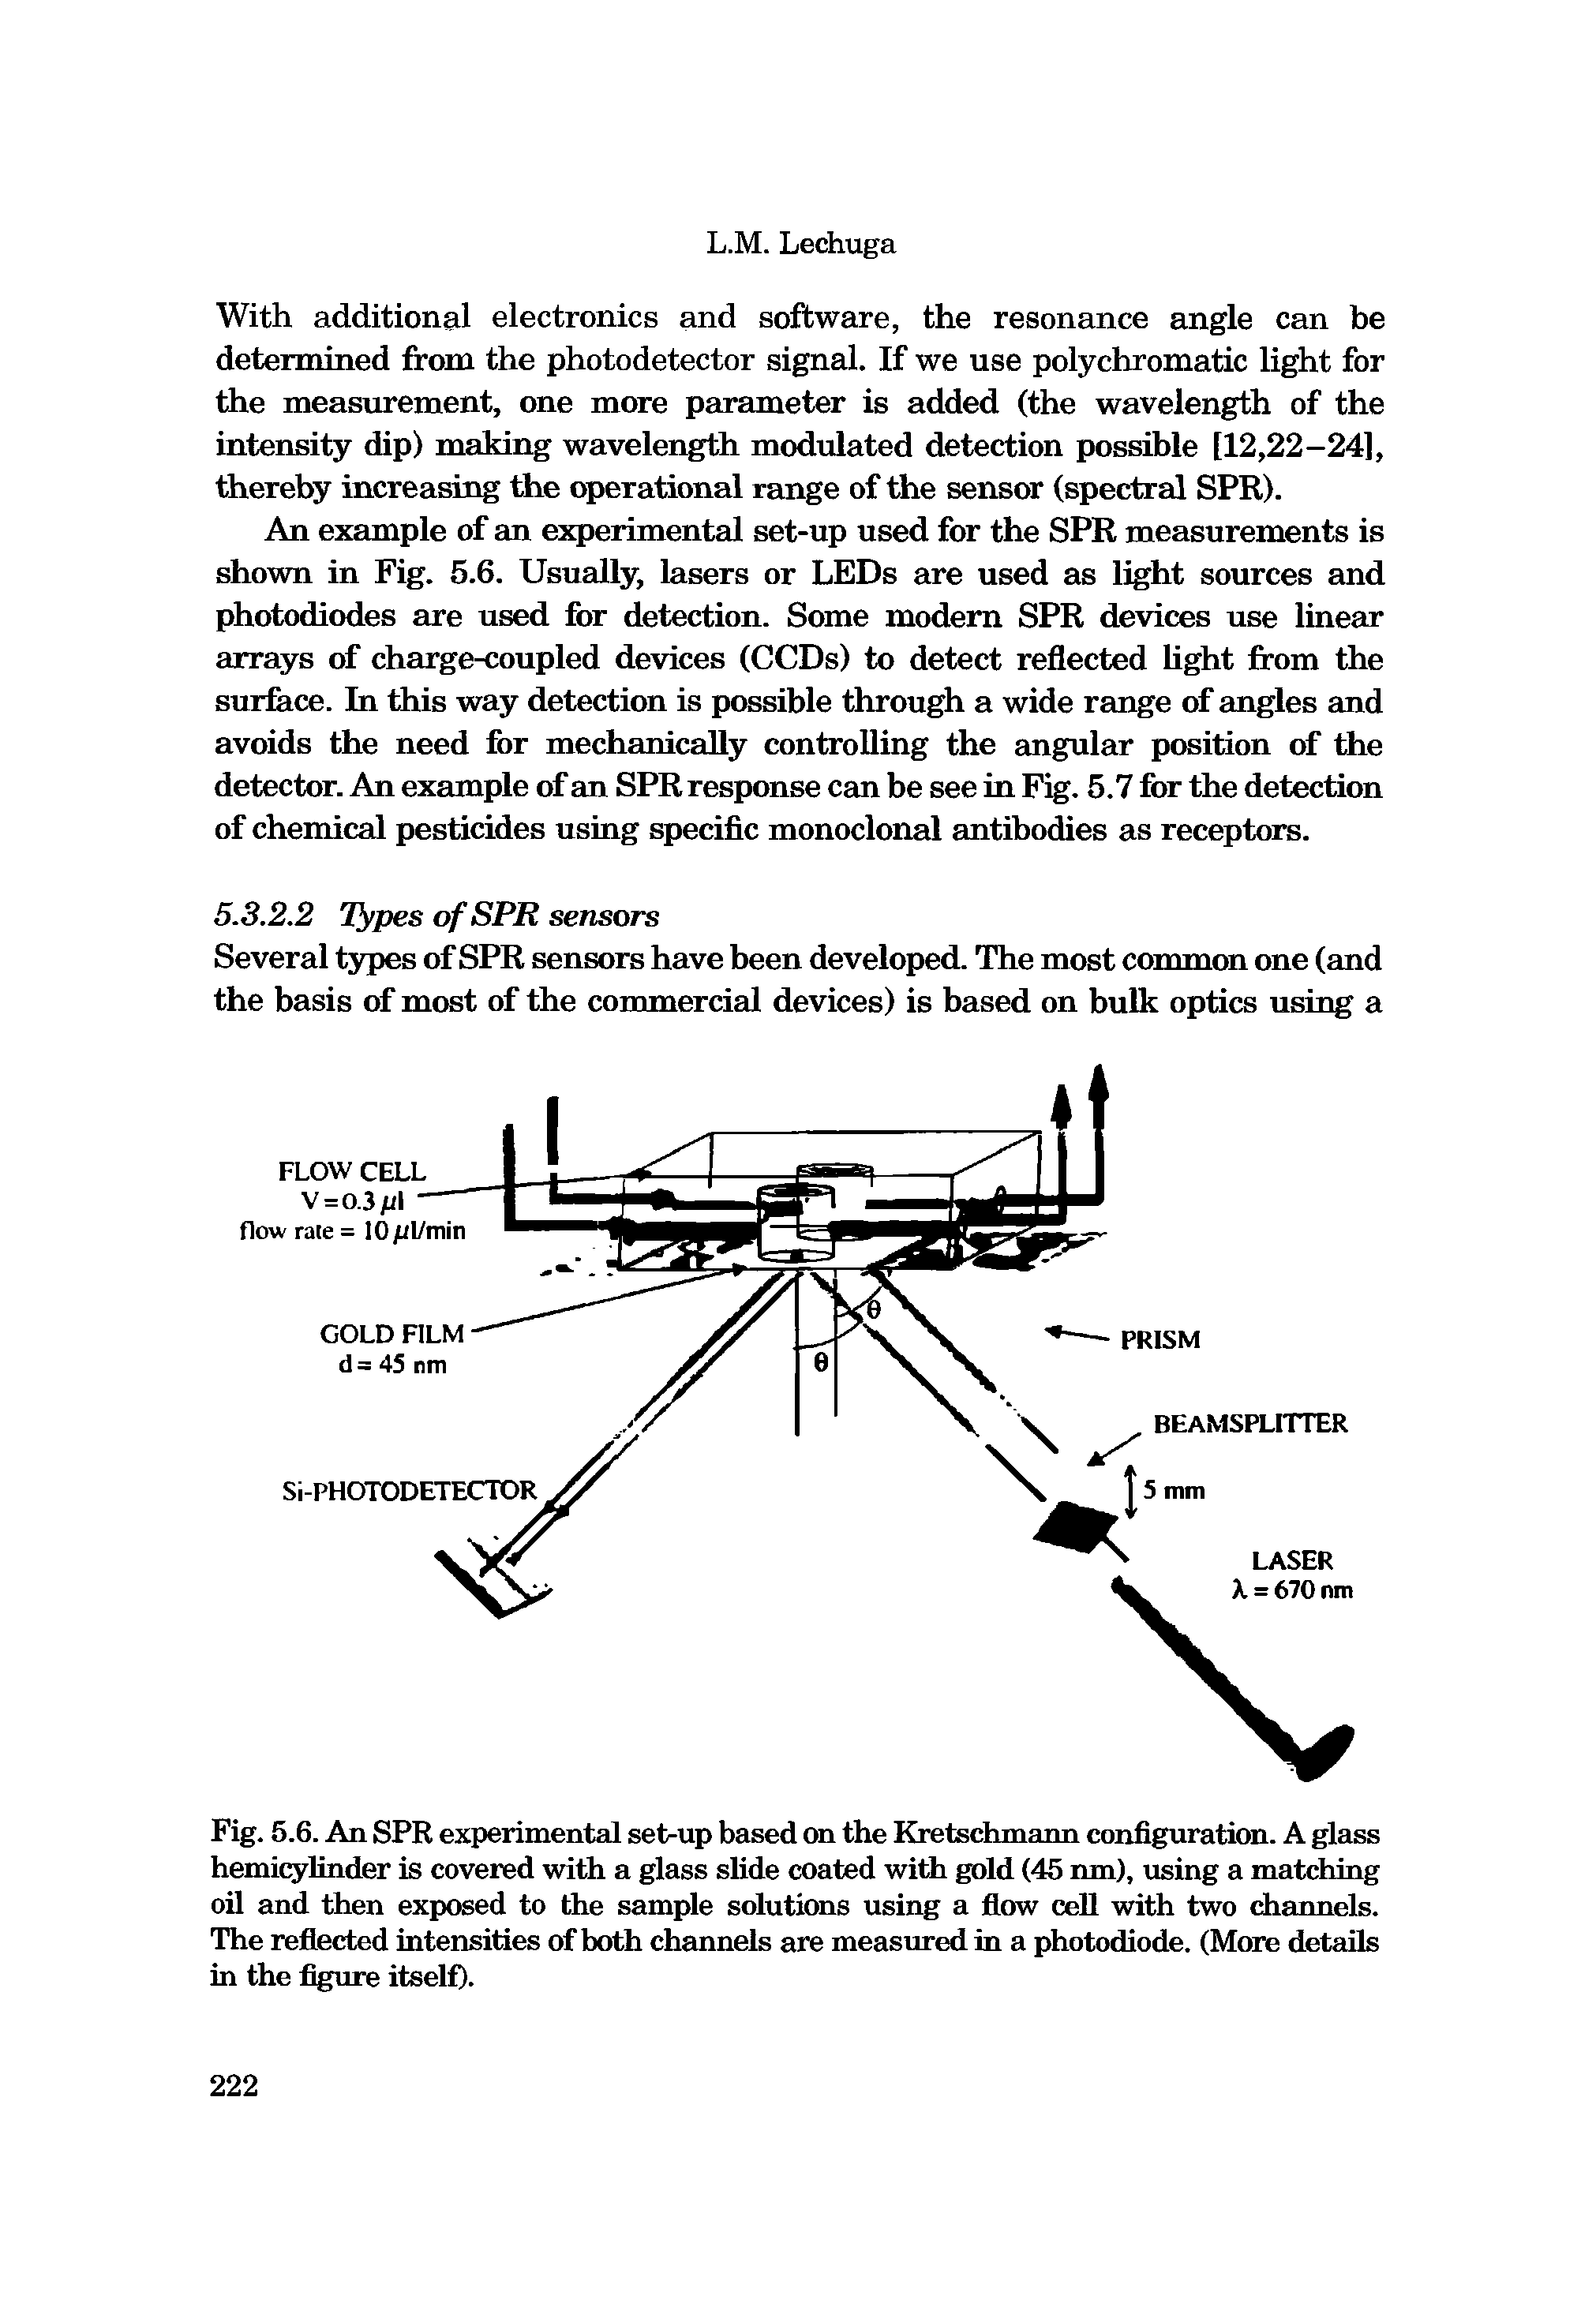 Fig. 5.6. An SPR experimental set-up based on the Kretschmann configuration. A glass hemicylinder is covered with a glass slide coated with gold (45 nm), using a matching oil and then exposed to the sample solutions using a flow cell with two channels. The reflected intensities of both channels are measured in a photodiode. (More details in the flgure itself).